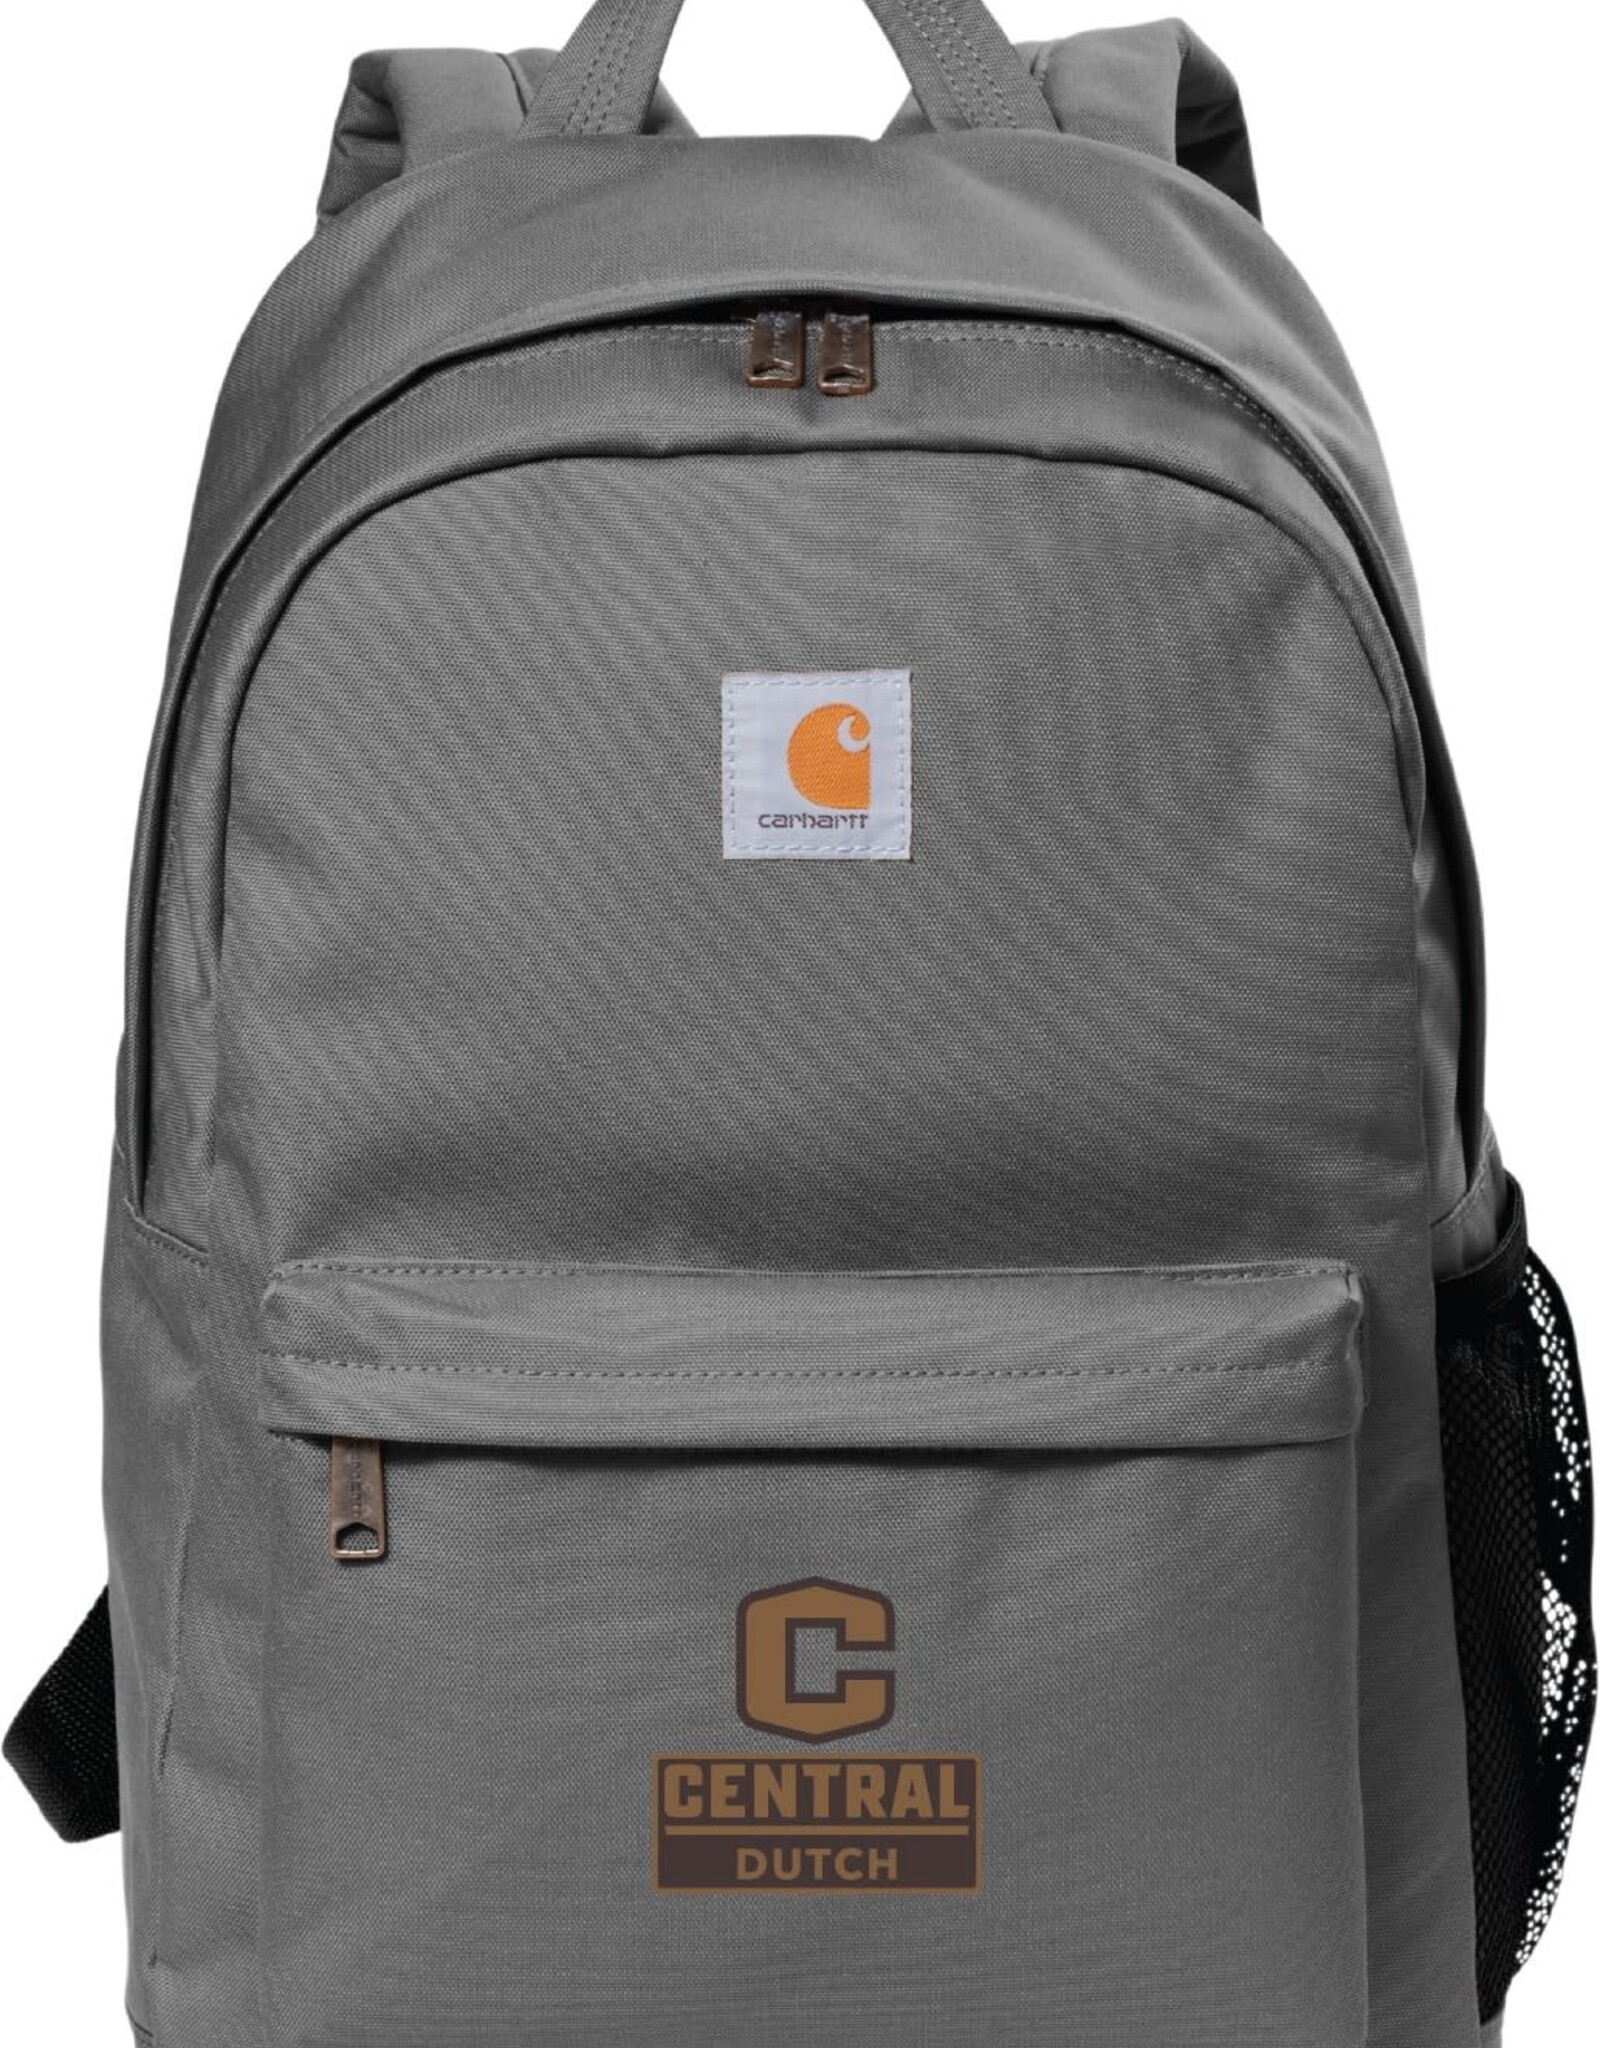 Carhartt Carhartt Backpack with Leather Patch